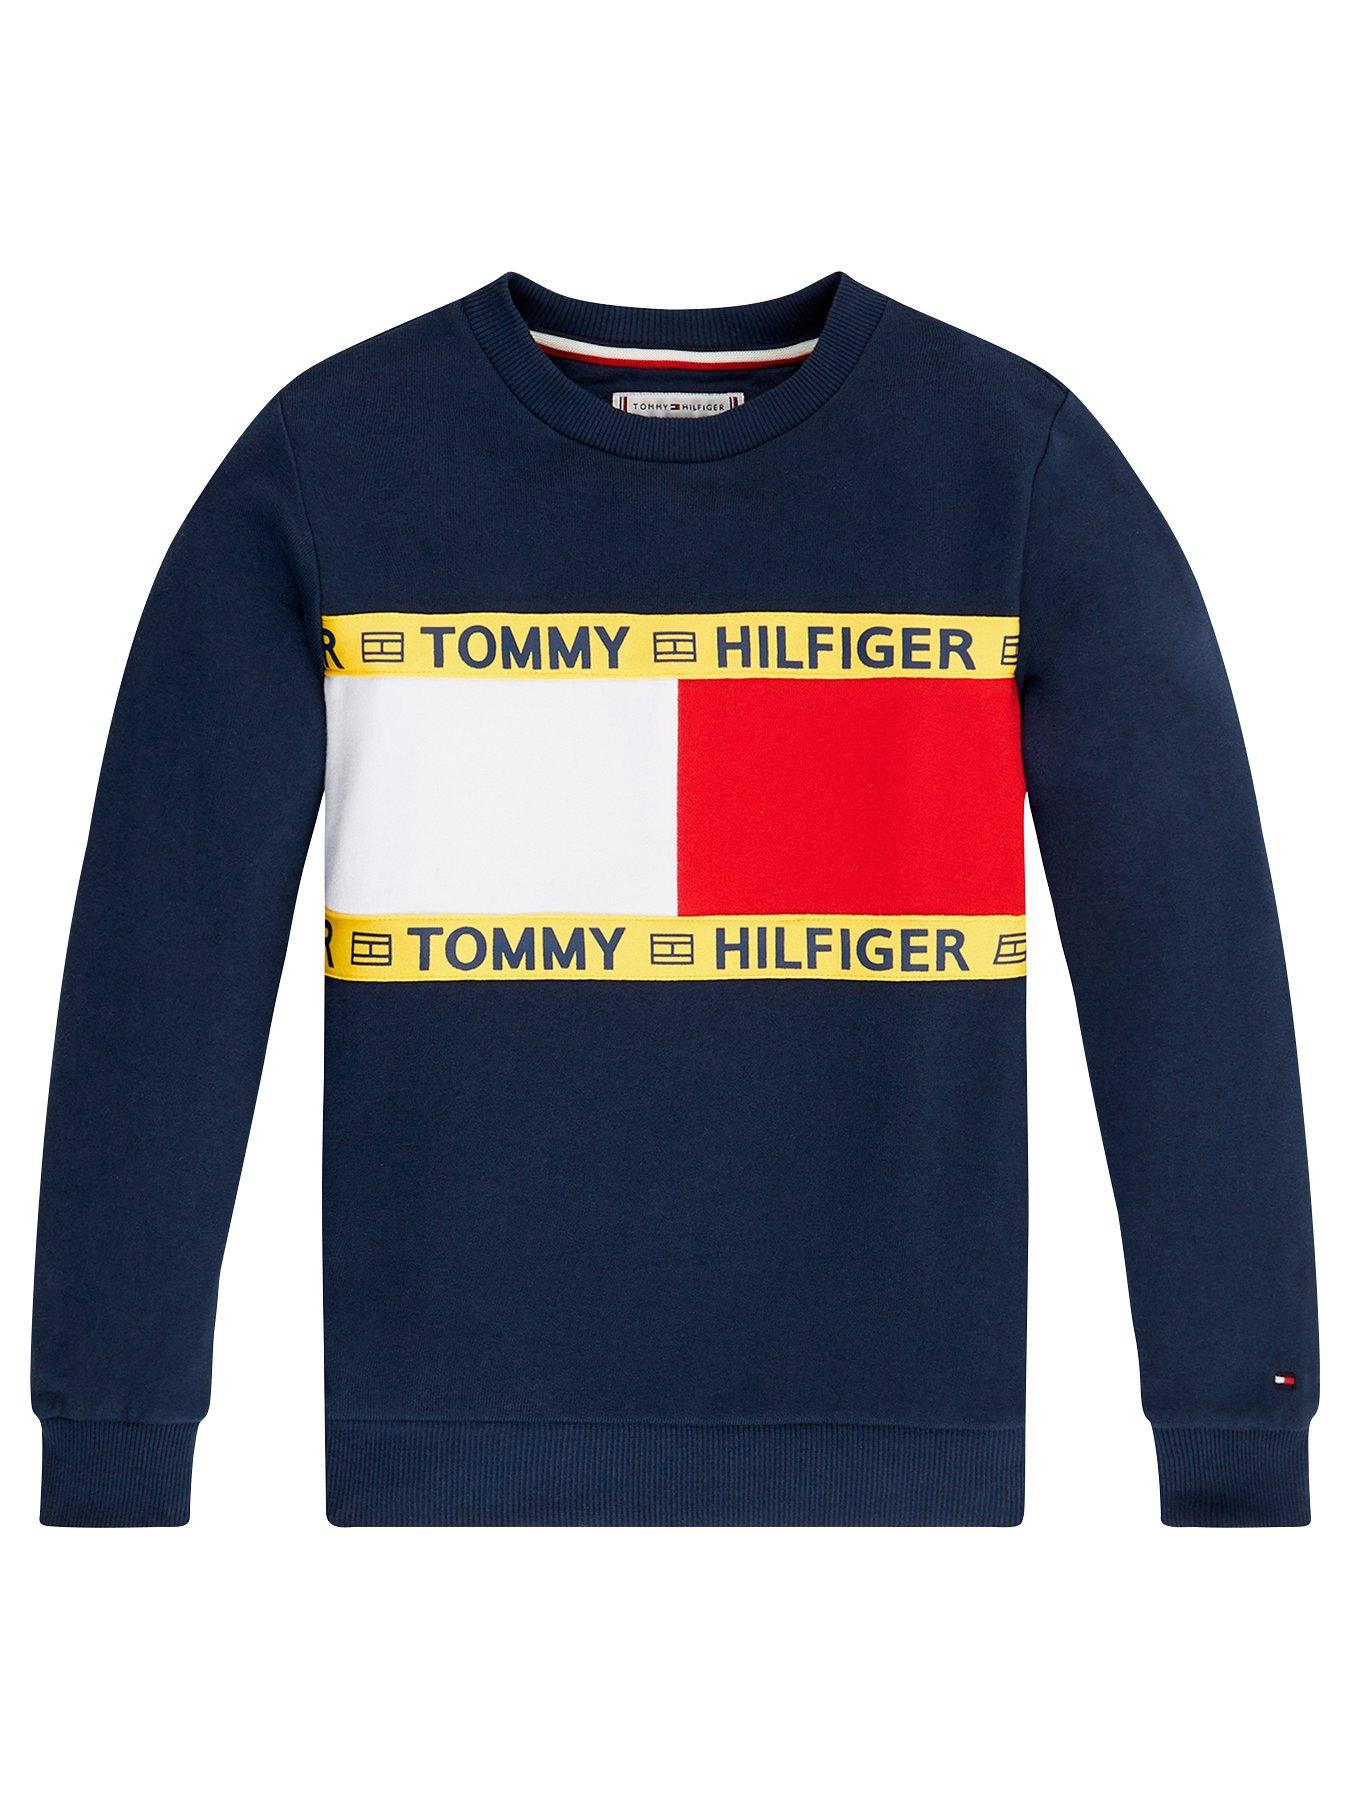 Child Teen Tommy Hilfiger T Tee Shirt Top Red BNWT Various Sizes